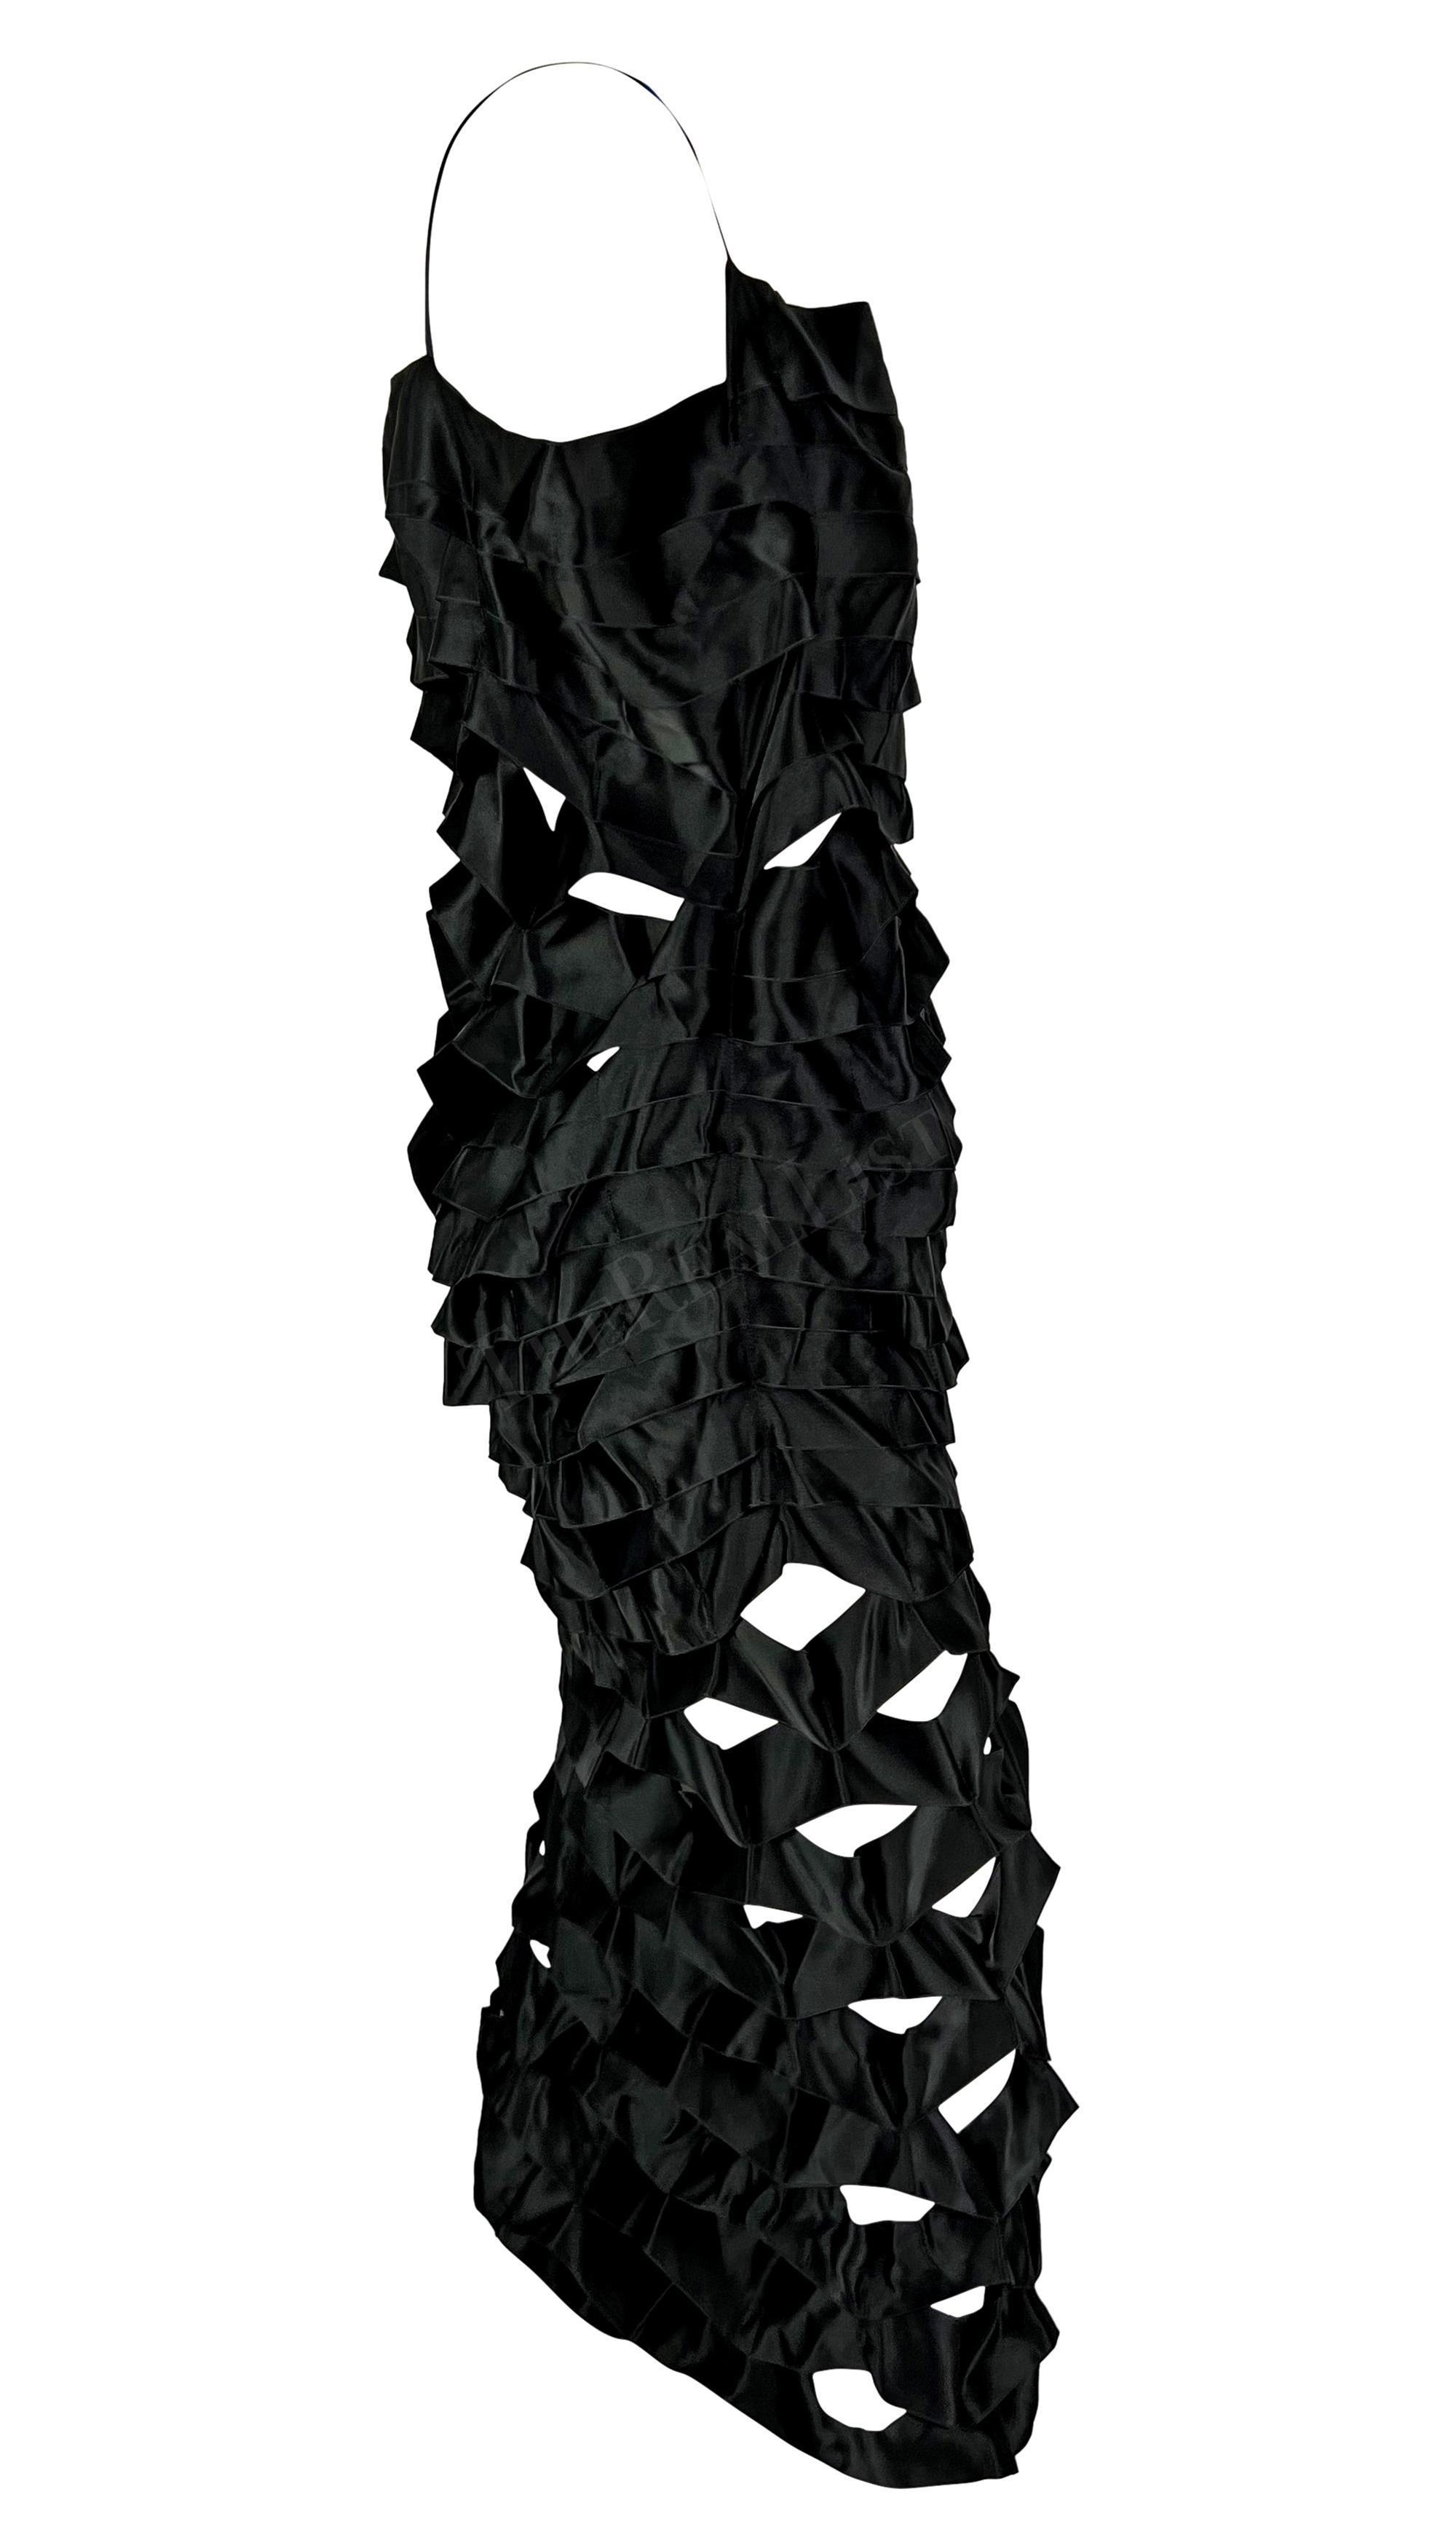 S/S 1998 Helmut Lang Black Silk Cut Out Ribbon Runway Gown  For Sale 6